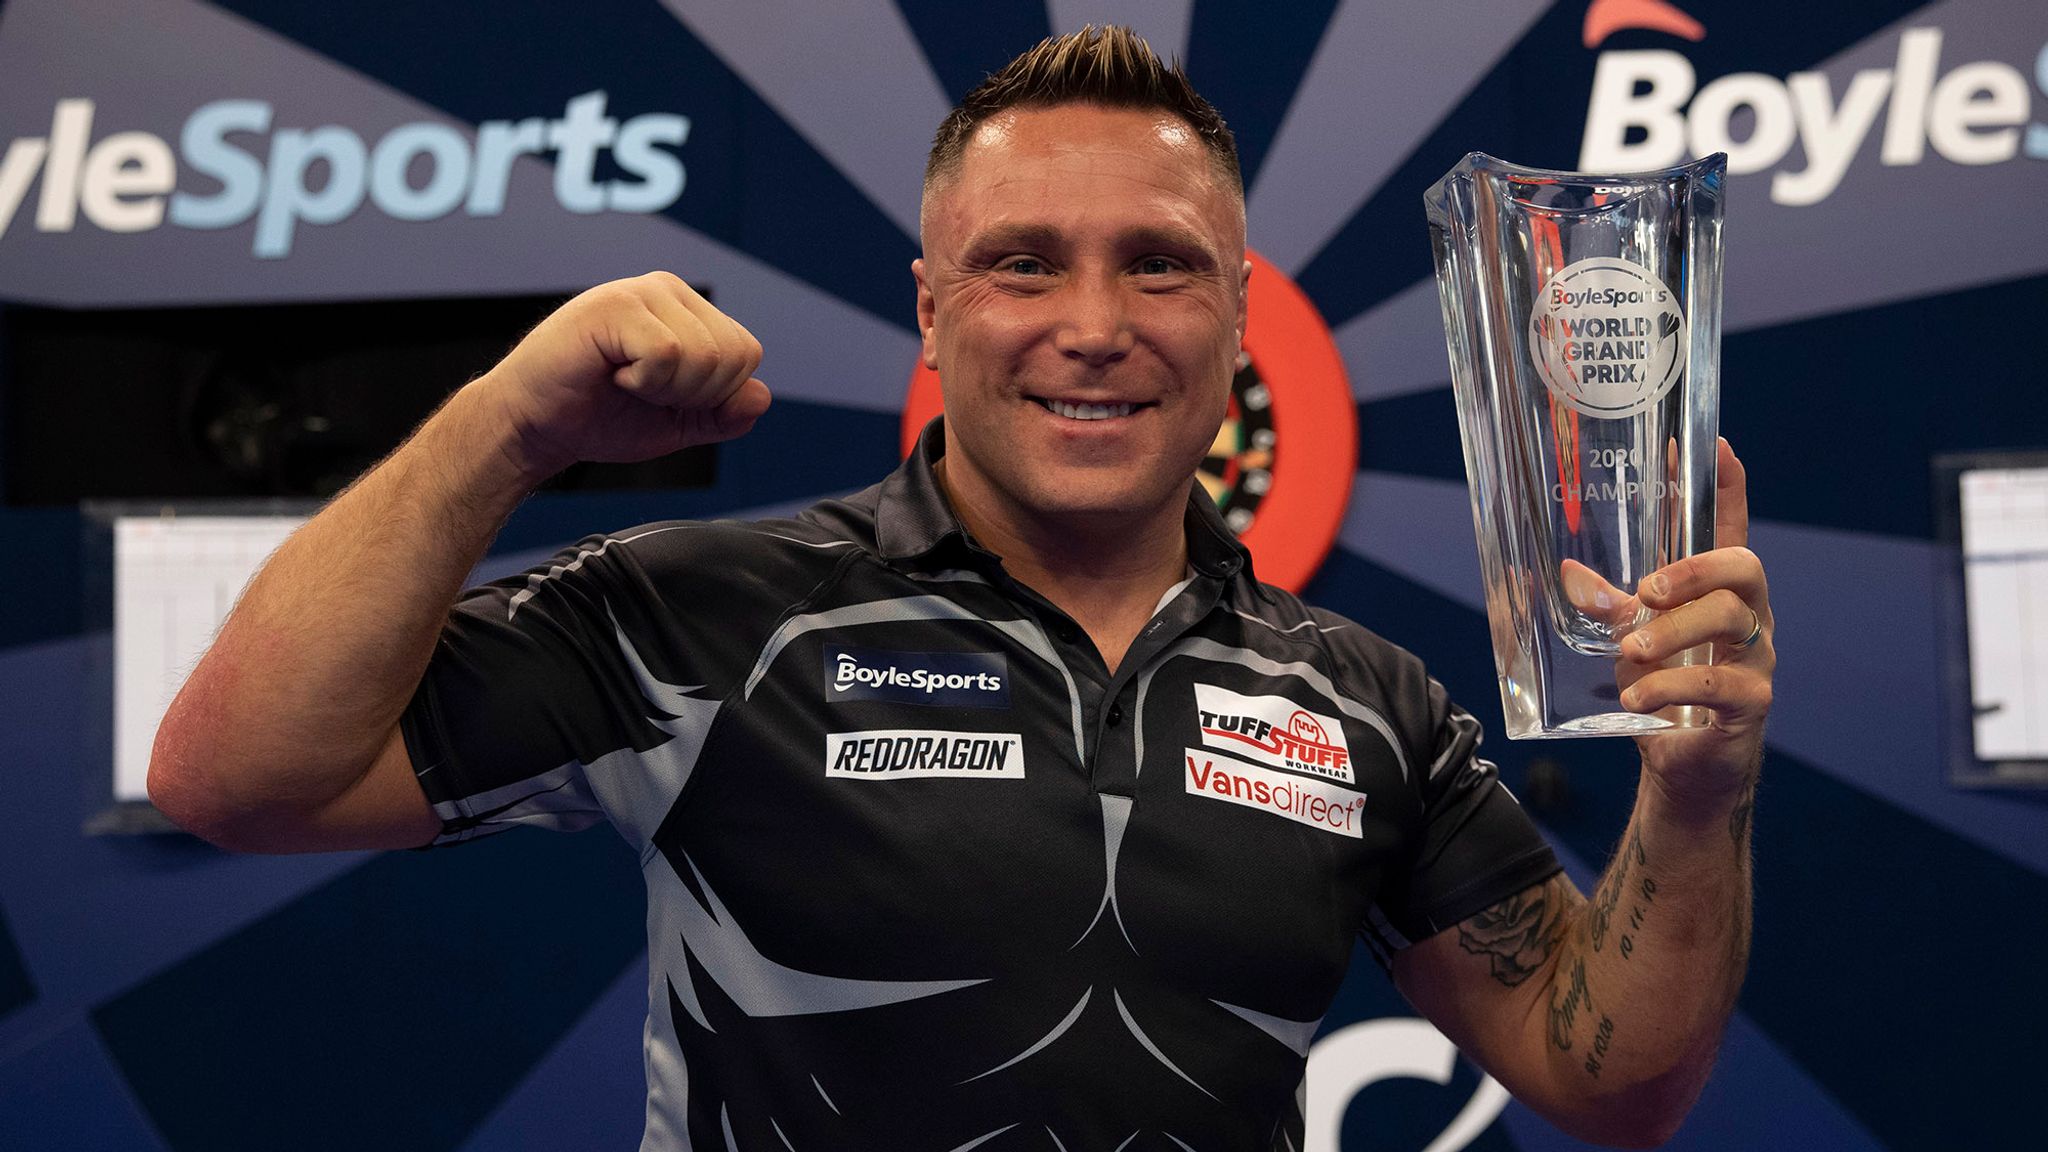 Final skrå rutine World Grand Prix Darts moved from Dublin to Leicester's Morningside Arena  for 2021 | Darts News | Sky Sports